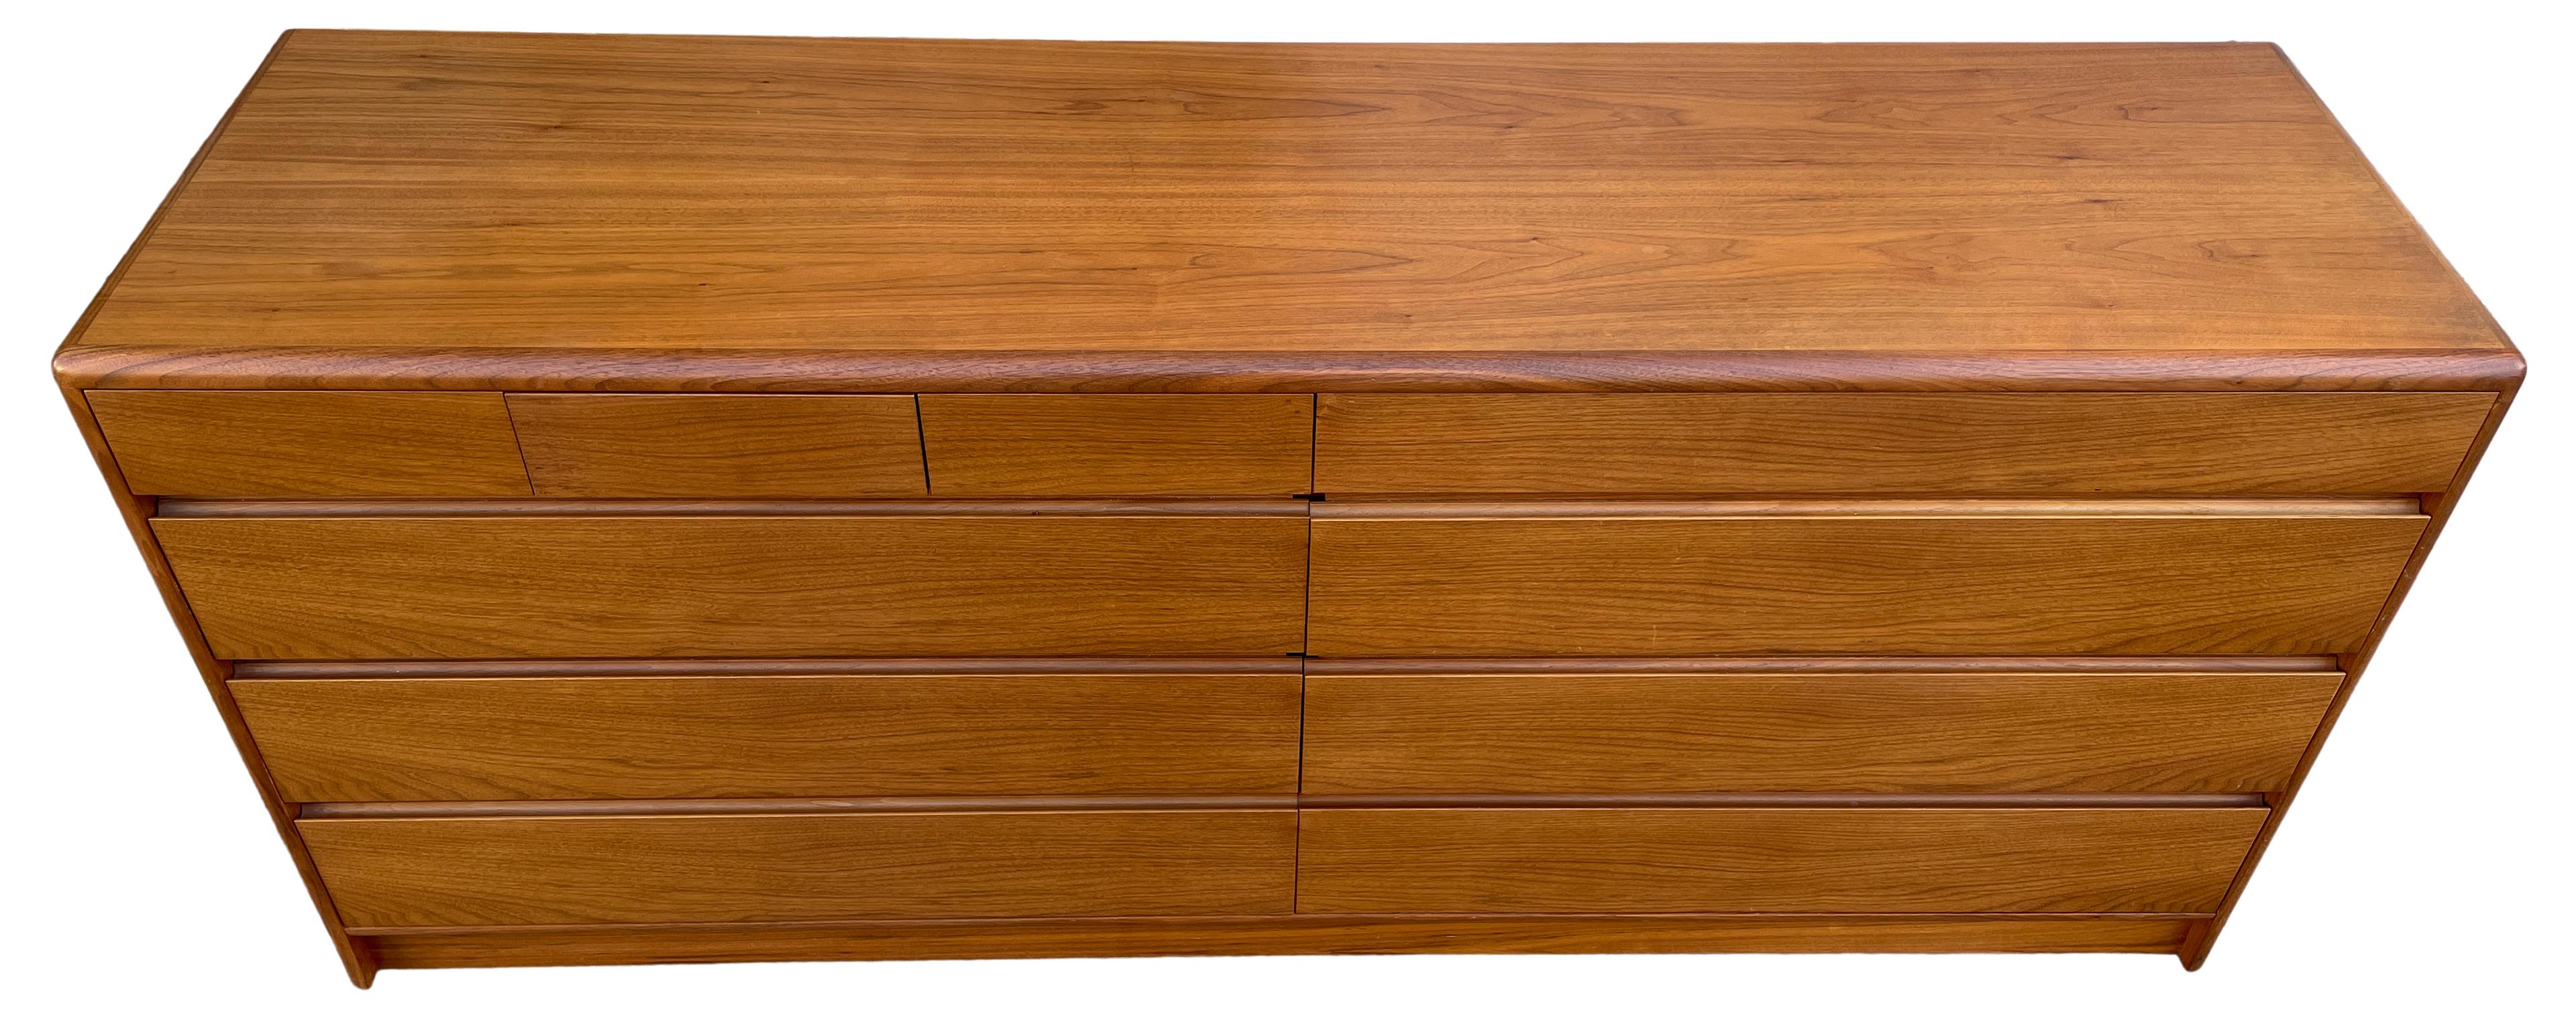 Beautiful mid-century Danish modern teak 10 drawer dresser Credenza by Nordisk Andels-Eksport. Great simple design and great vintage condition - clean inside and out. Drawers slide smooth with dovetail construction. Has 3 small top drawers on left